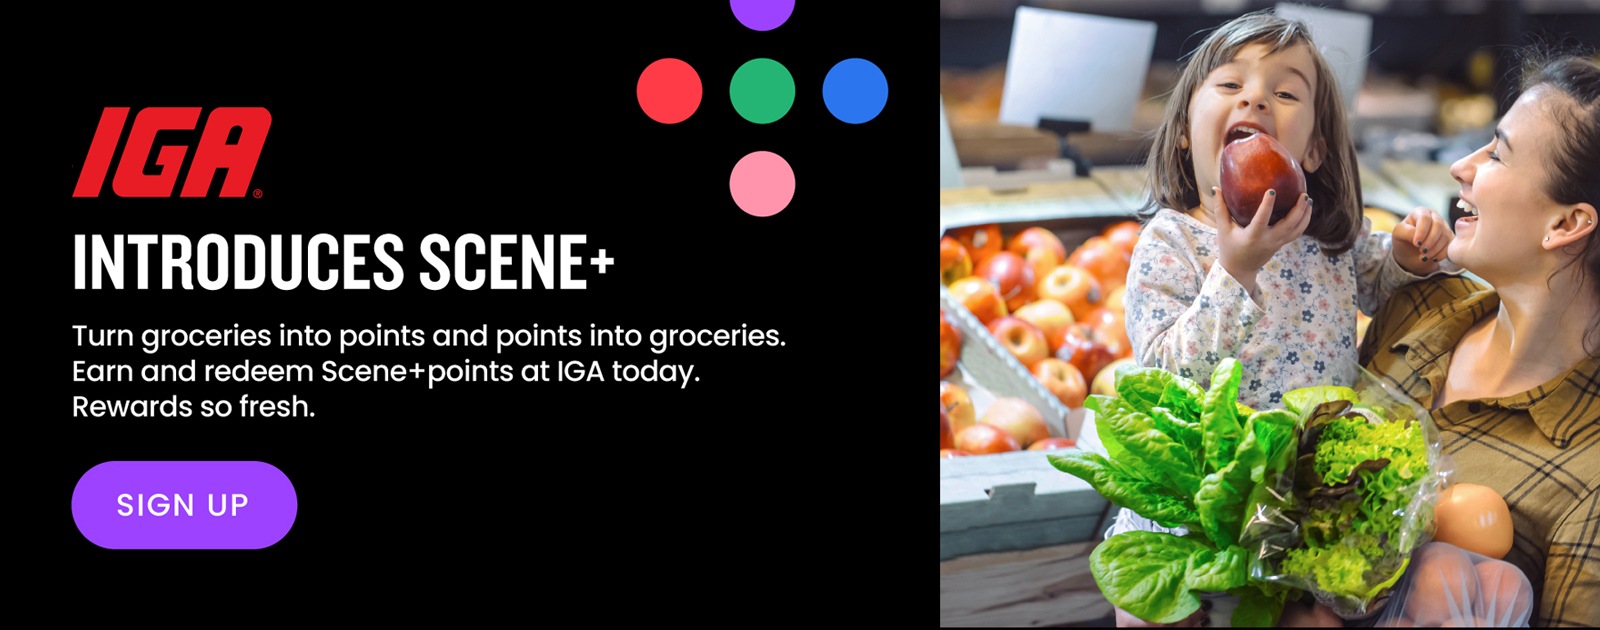 Text Reading 'IGA introduces Scene+. Turn groceries into points and points into groceries. Earn and redeem Scene+ points at IGA today. Rewards so fresh. Click on "Sign Up" button to get started.'